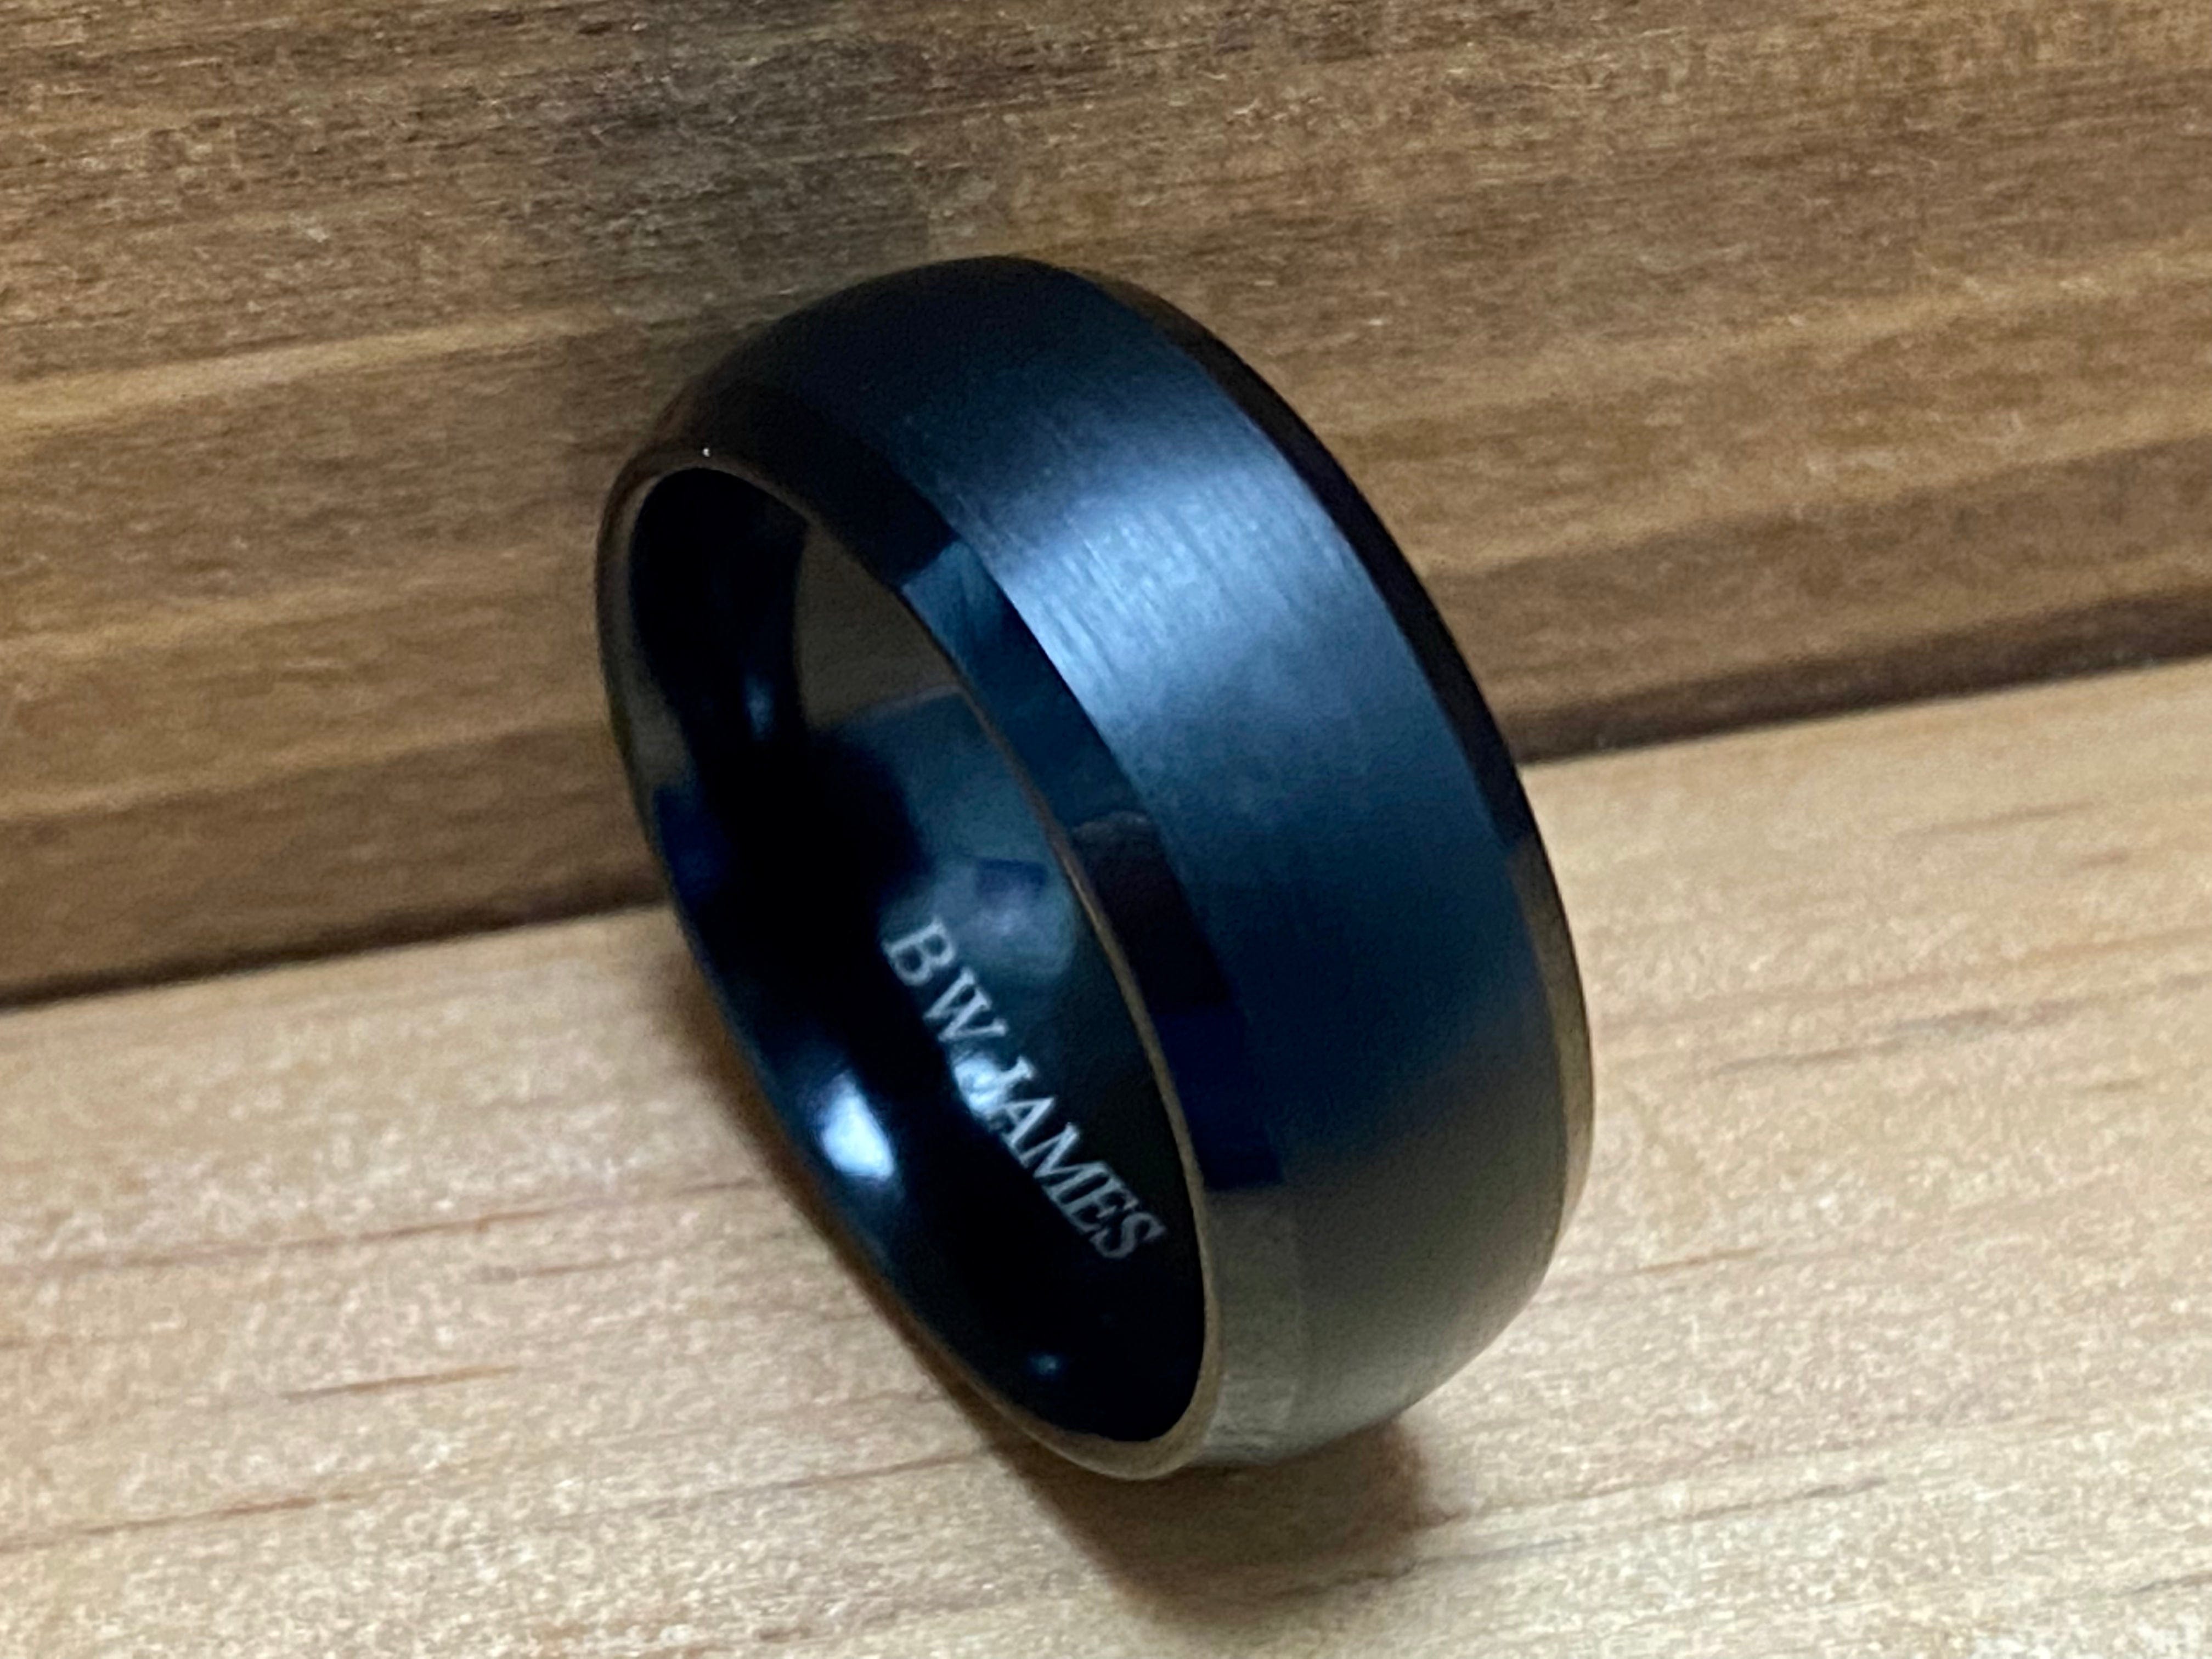 BW James Jewelers ALT Wedding Band “The Mach 5” 8mm Black Tungsten Ring With Brushed Finish